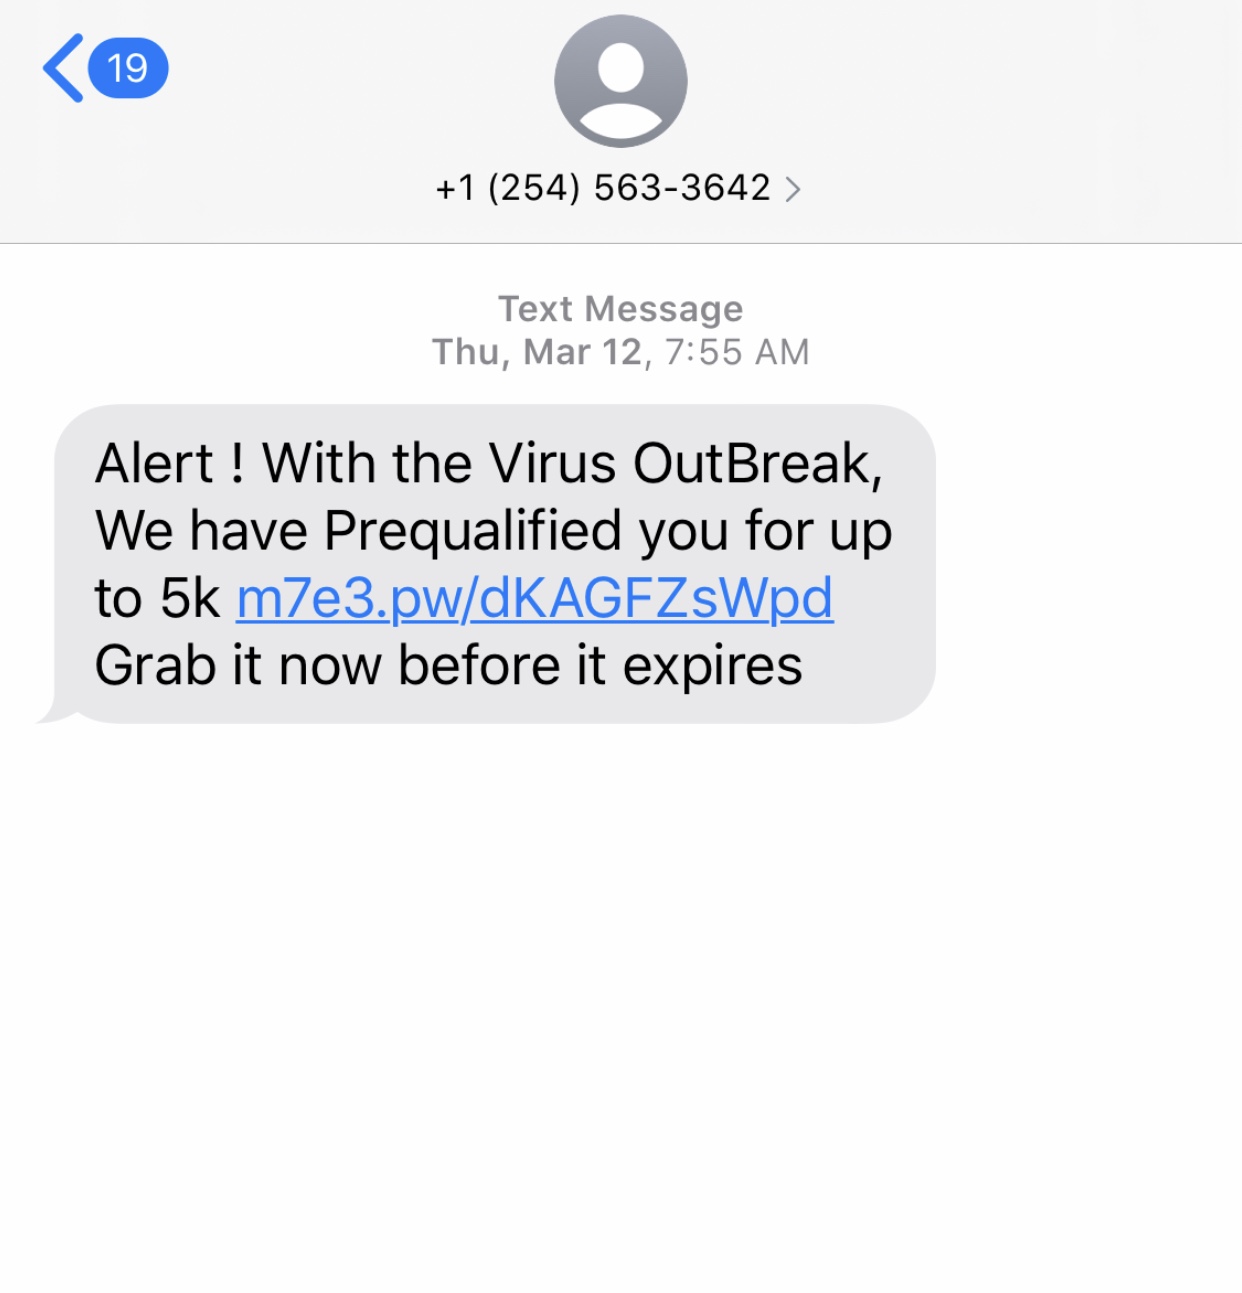 Example of Text msg scam